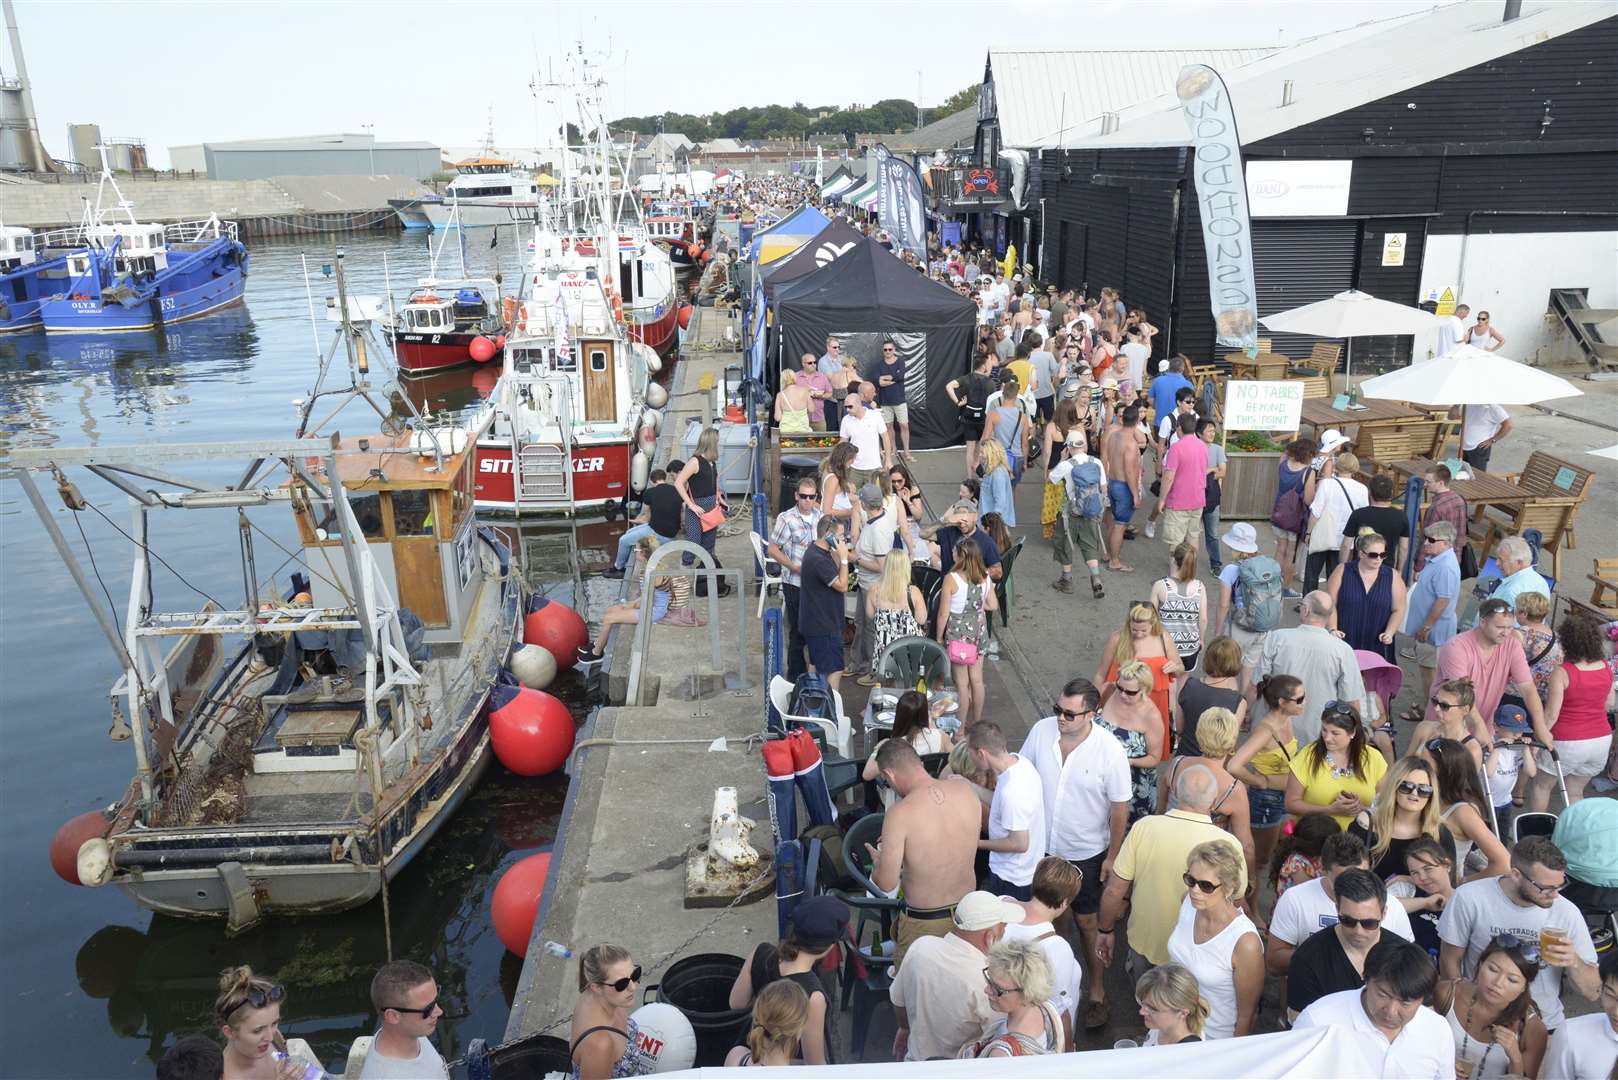 The annual Oyster Festival draws in thousands of people